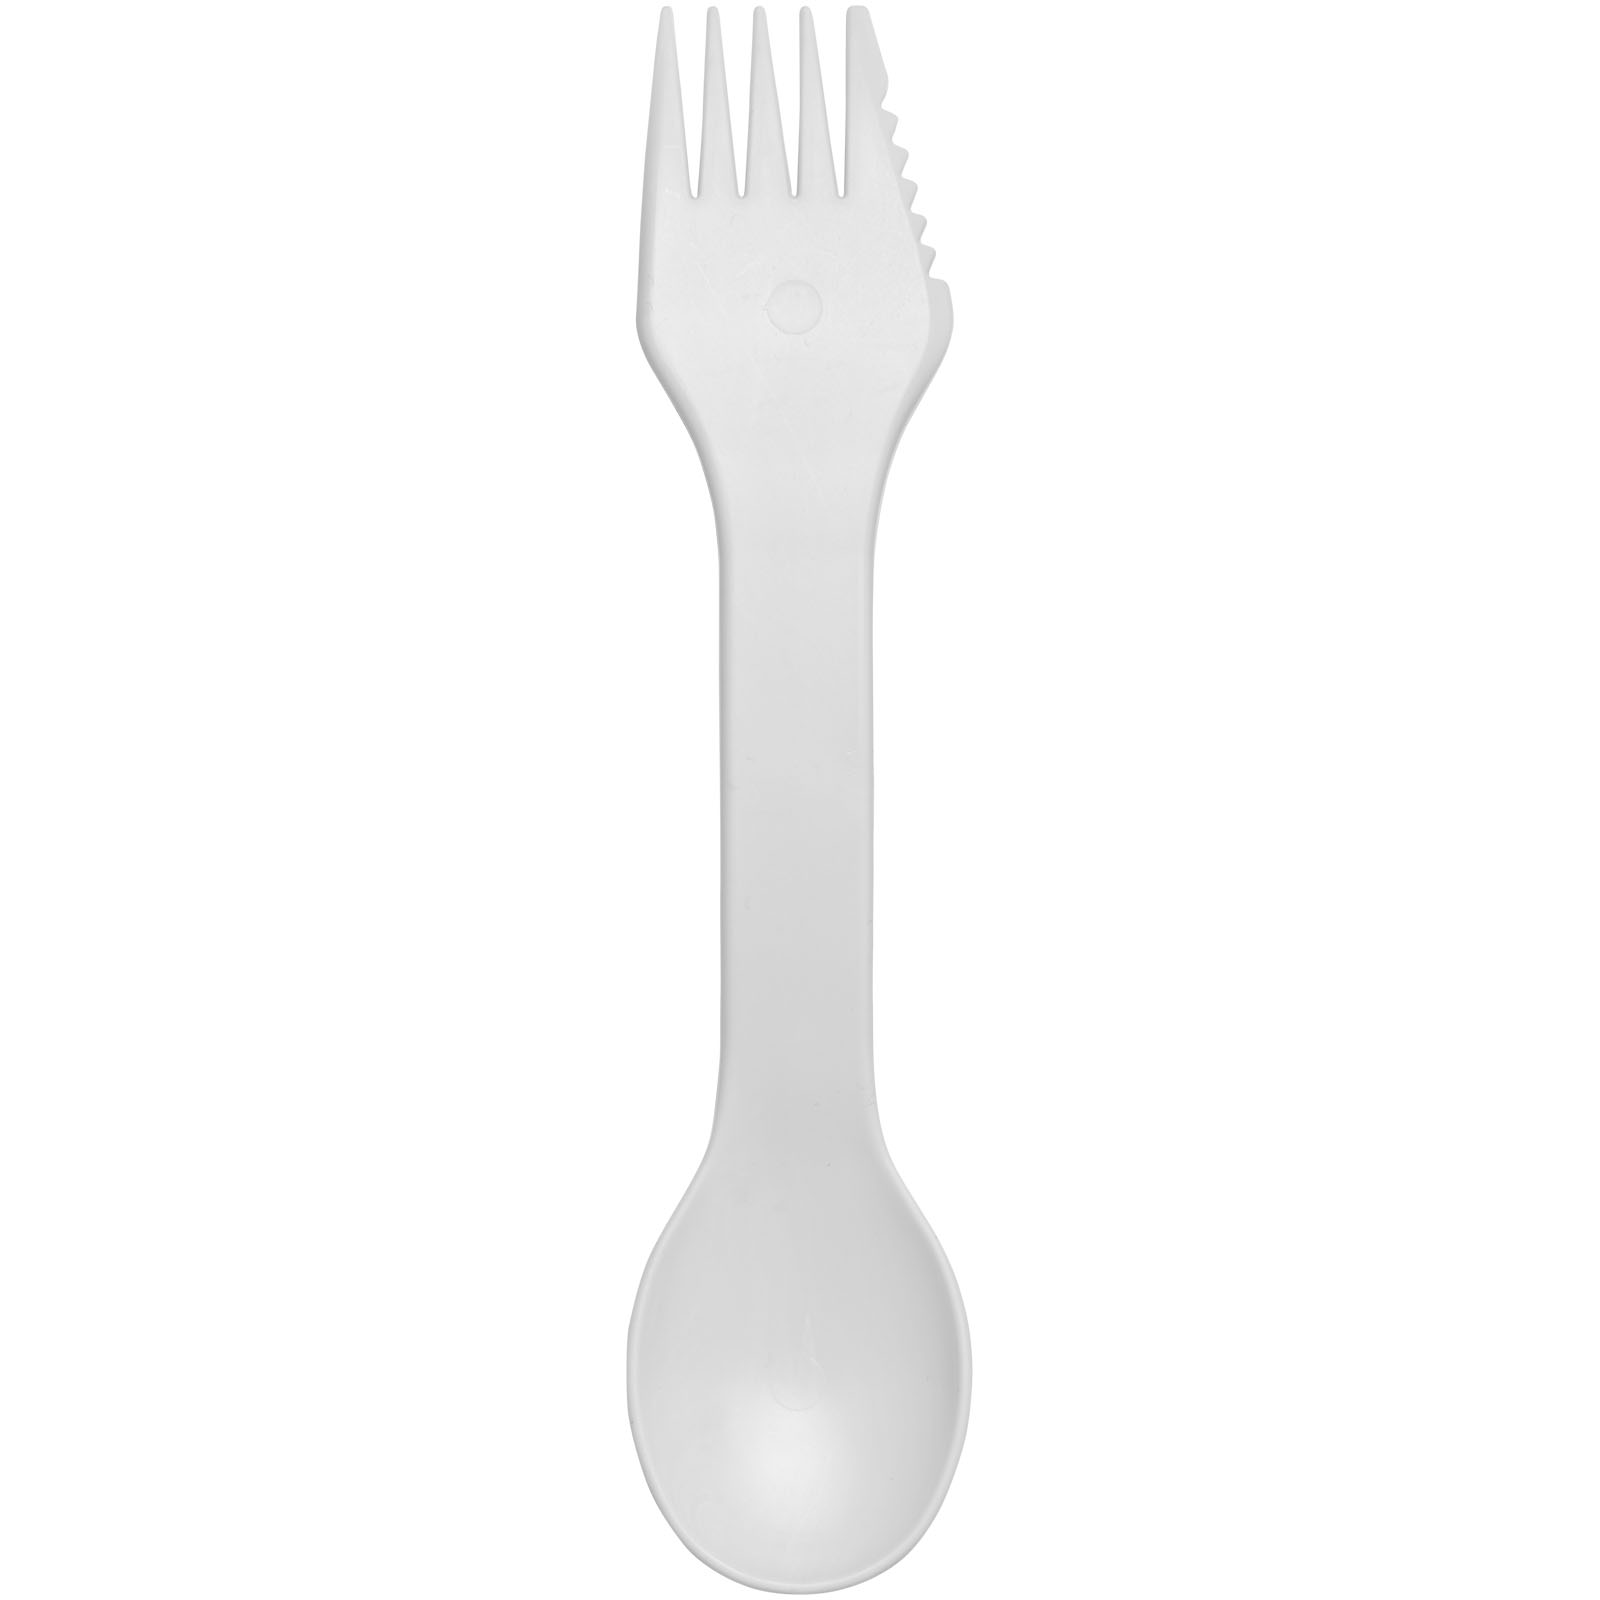 Advertising Picnic Accessories - Epsy Pure 3-in-1 spoon, fork and knife - 1